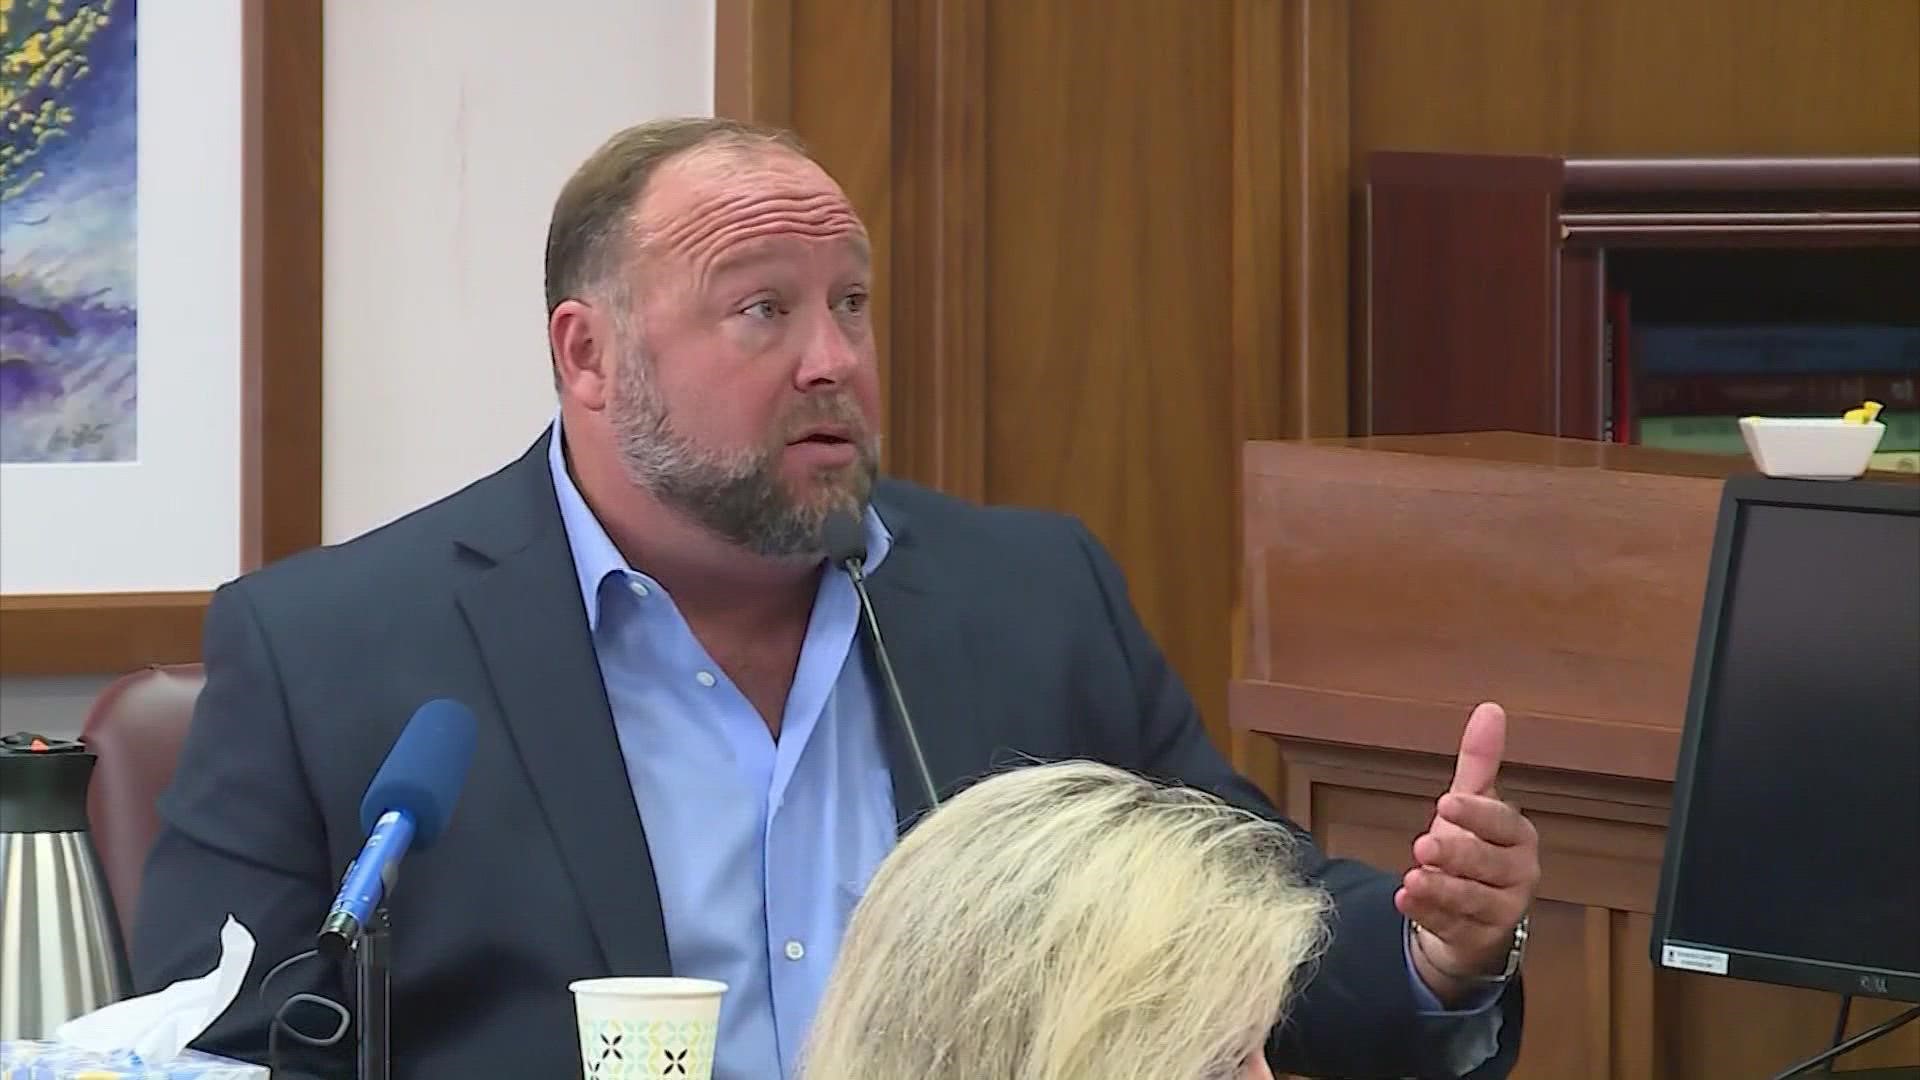 Alex Jones may also face perjury and obstruction of justice charges.